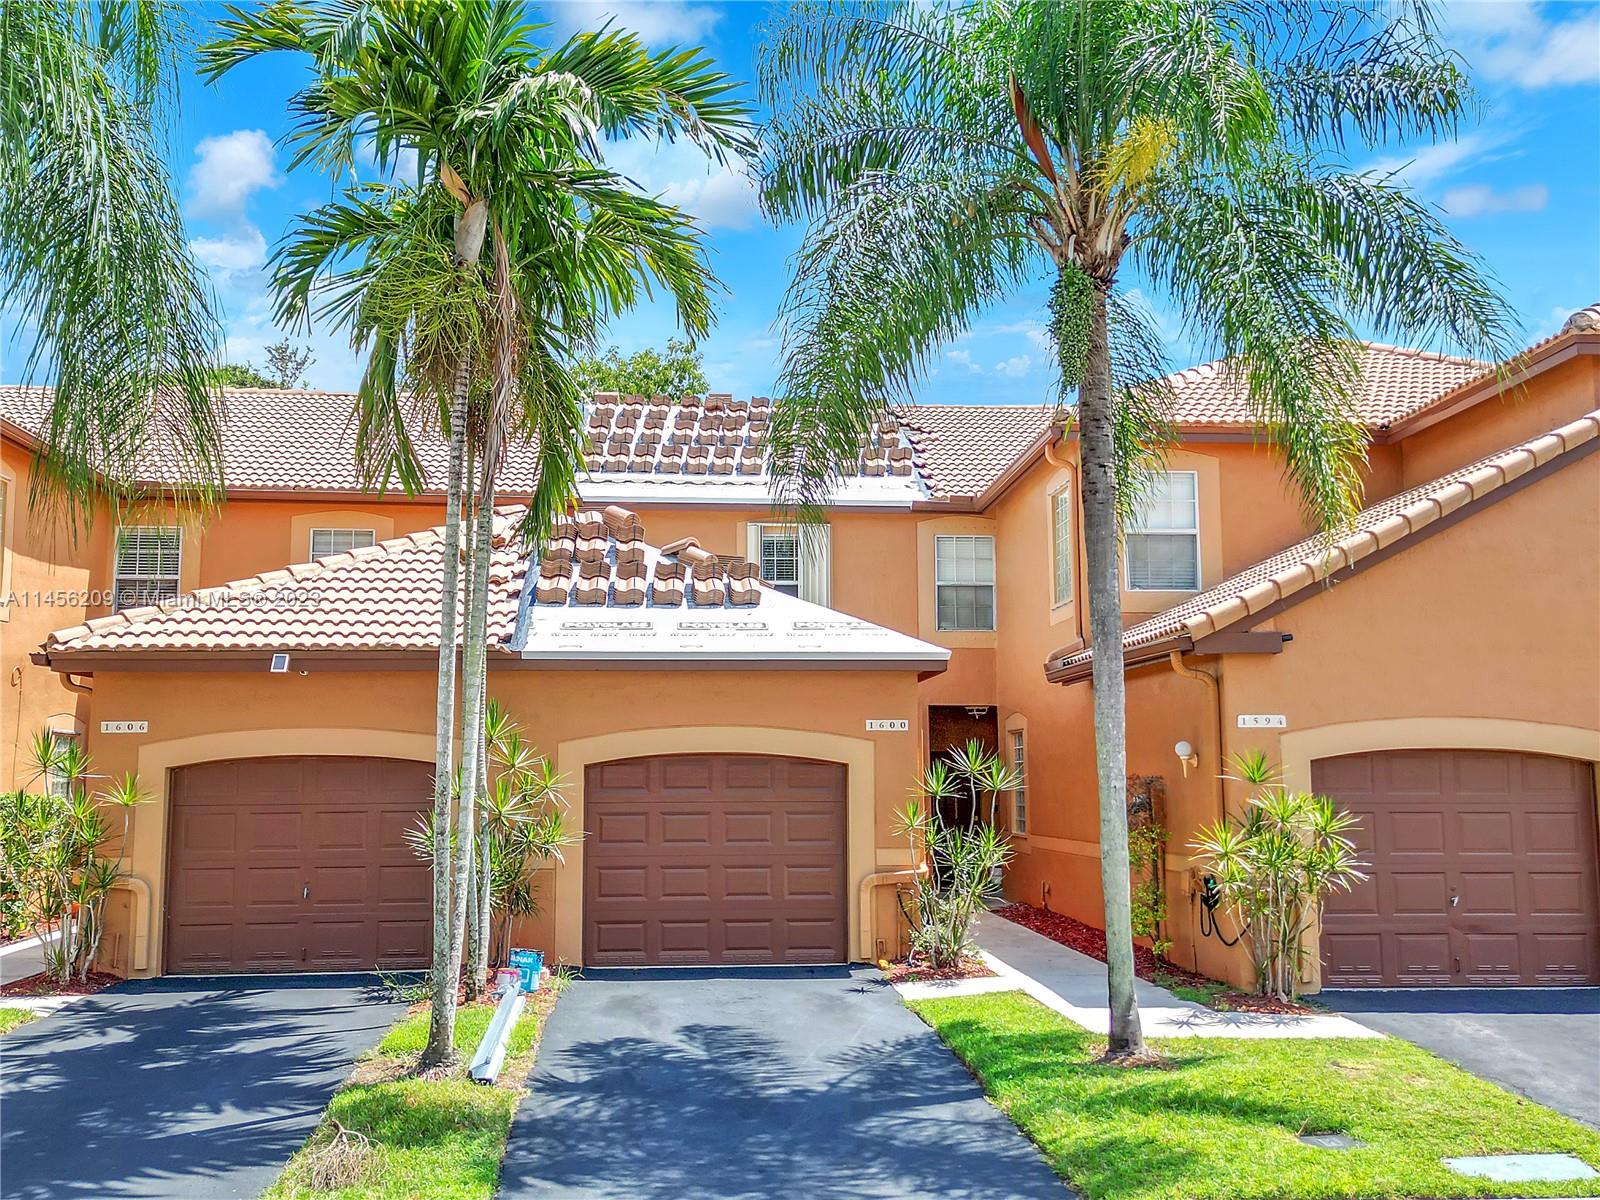 This stunning property boasts a range of desirable features that make it a must-see for homebuyers. The highlight of this home is its beautifully upgraded kitchen, complete with modern cabinets, elegant granite countertops, and stainless steel appliances. Inside, you'll find built-in custom closets in the bedrooms, ensuring ample storage space. It is situated in one of Broward County's top-rated school districts, making it an ideal choice for families. The community itself offers additional amenities, including a pool and playground, enhancing the overall quality of life for residents. Furthermore, this home provides easy access to major highways. With an attached garage, convenience is at your fingertips. A brand-new roof, provides peace of mind and added value to the home.